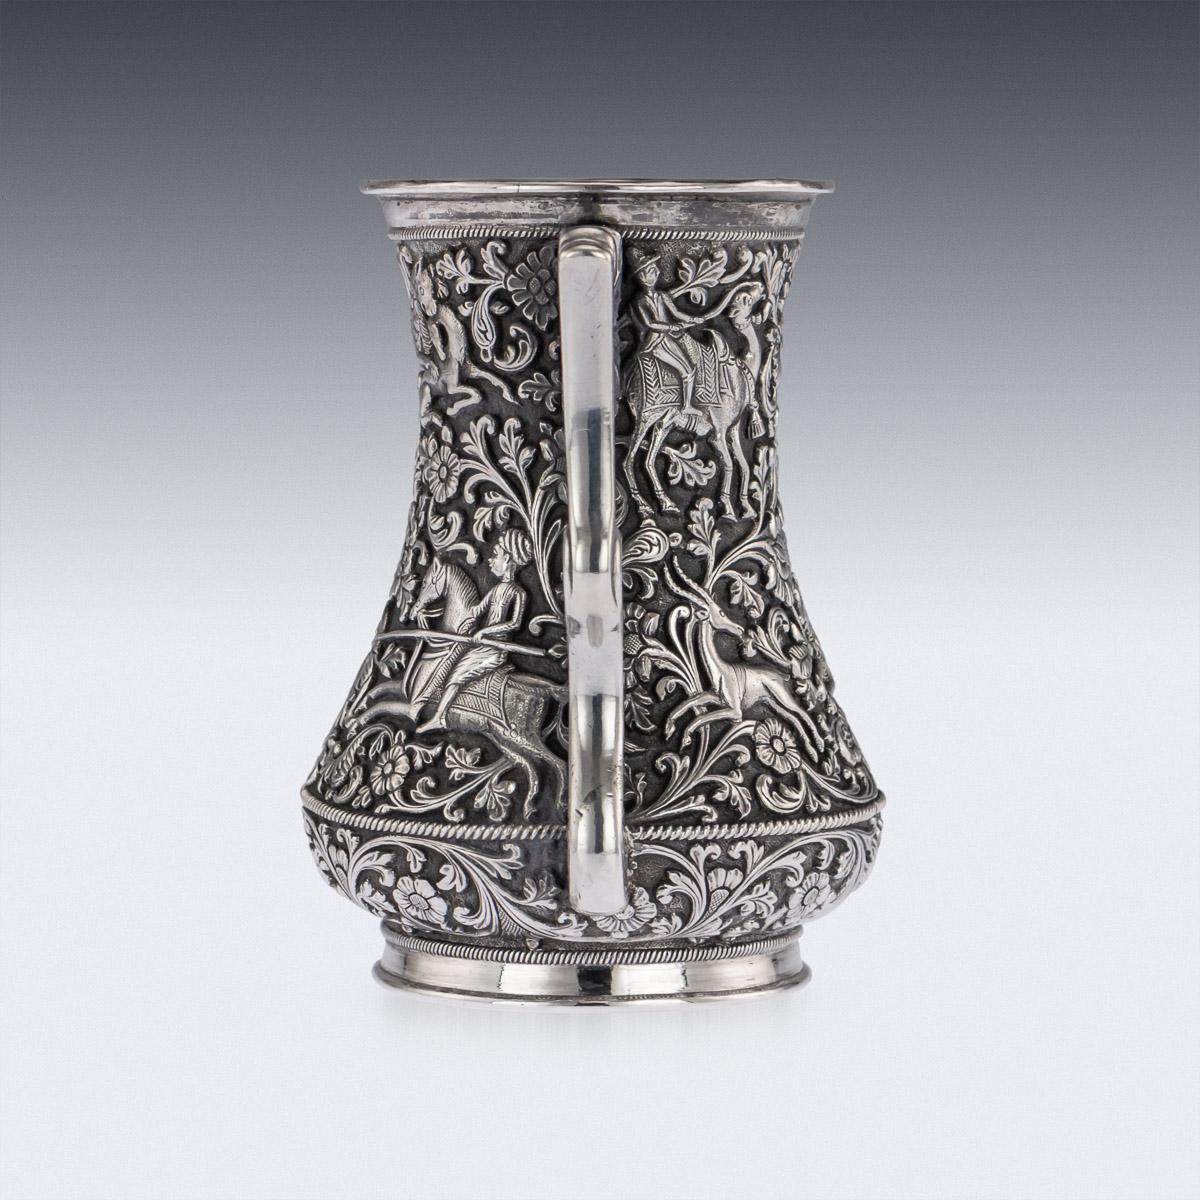 Antique 19th century Indian Kutch (Cutch) solid silver cup, inverted shaped, impressively heavy gauge and exceptionally fine workmanship, very closely worked, depicting hunting scenes, surrounded by foliate and floral repoussé design on a matted